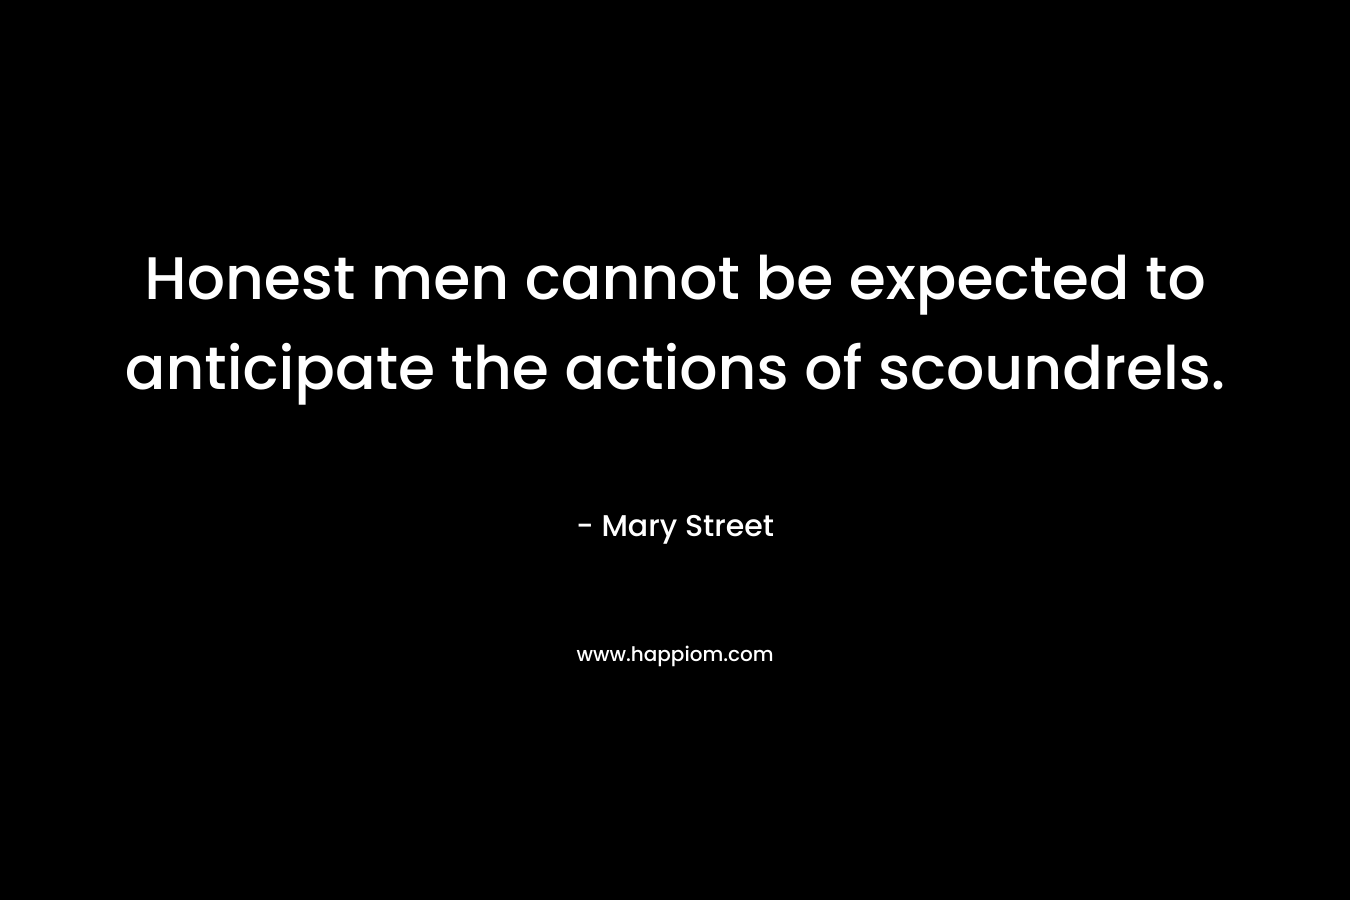 Honest men cannot be expected to anticipate the actions of scoundrels. – Mary Street